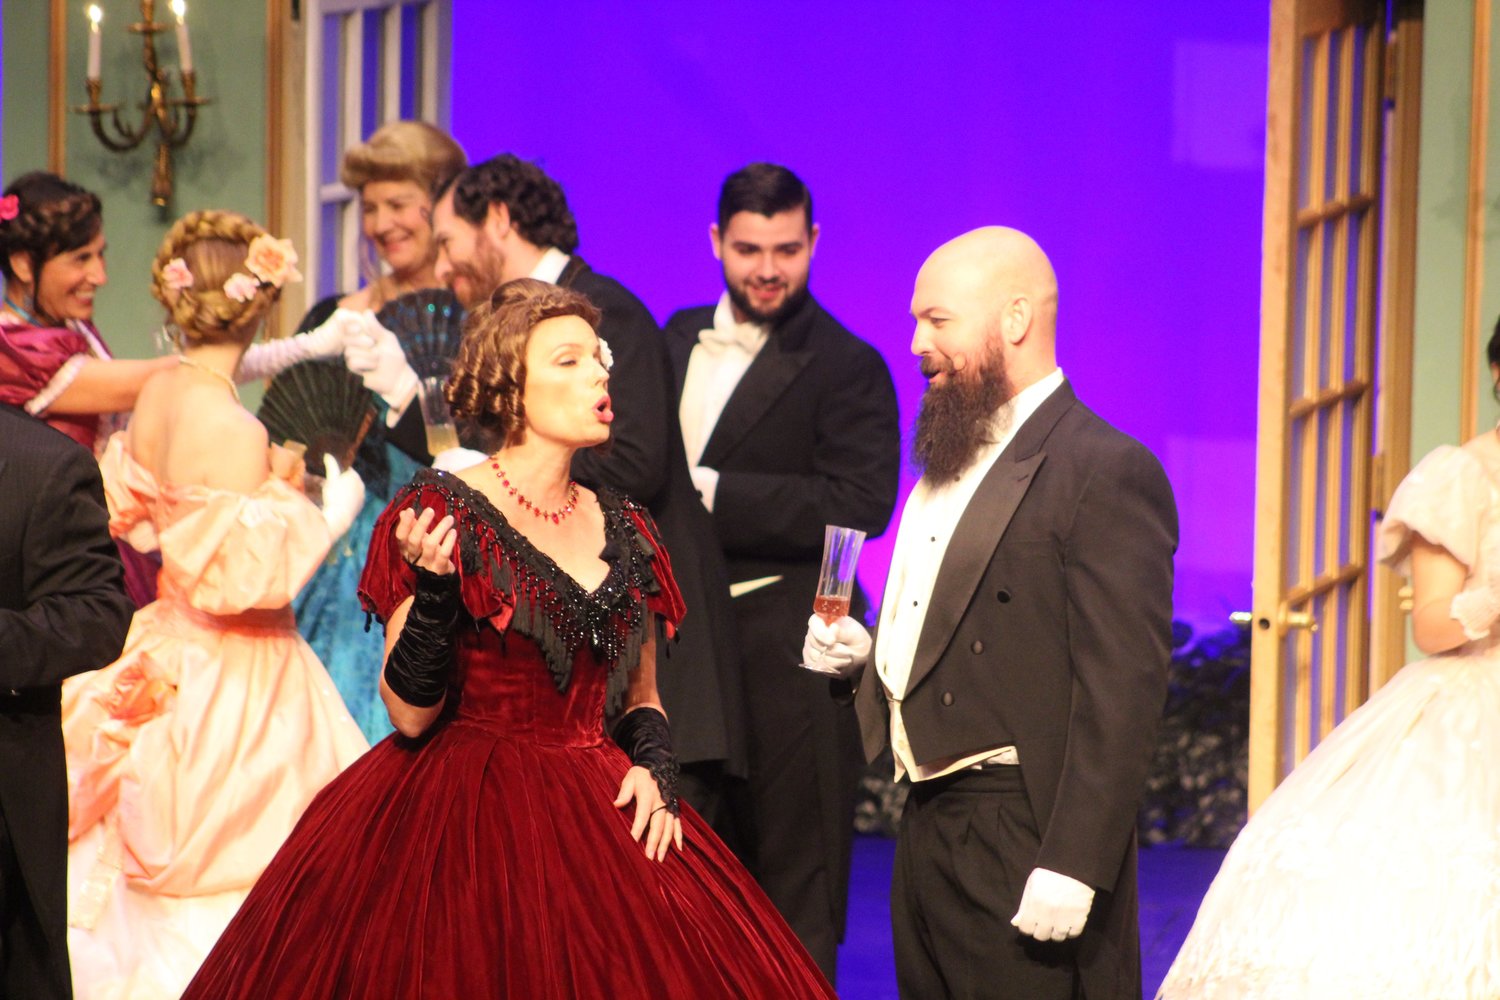 First Coast Opera serves Northeast Florida’s First Coast region through a series of concerts and staged productions of operas and operettas.